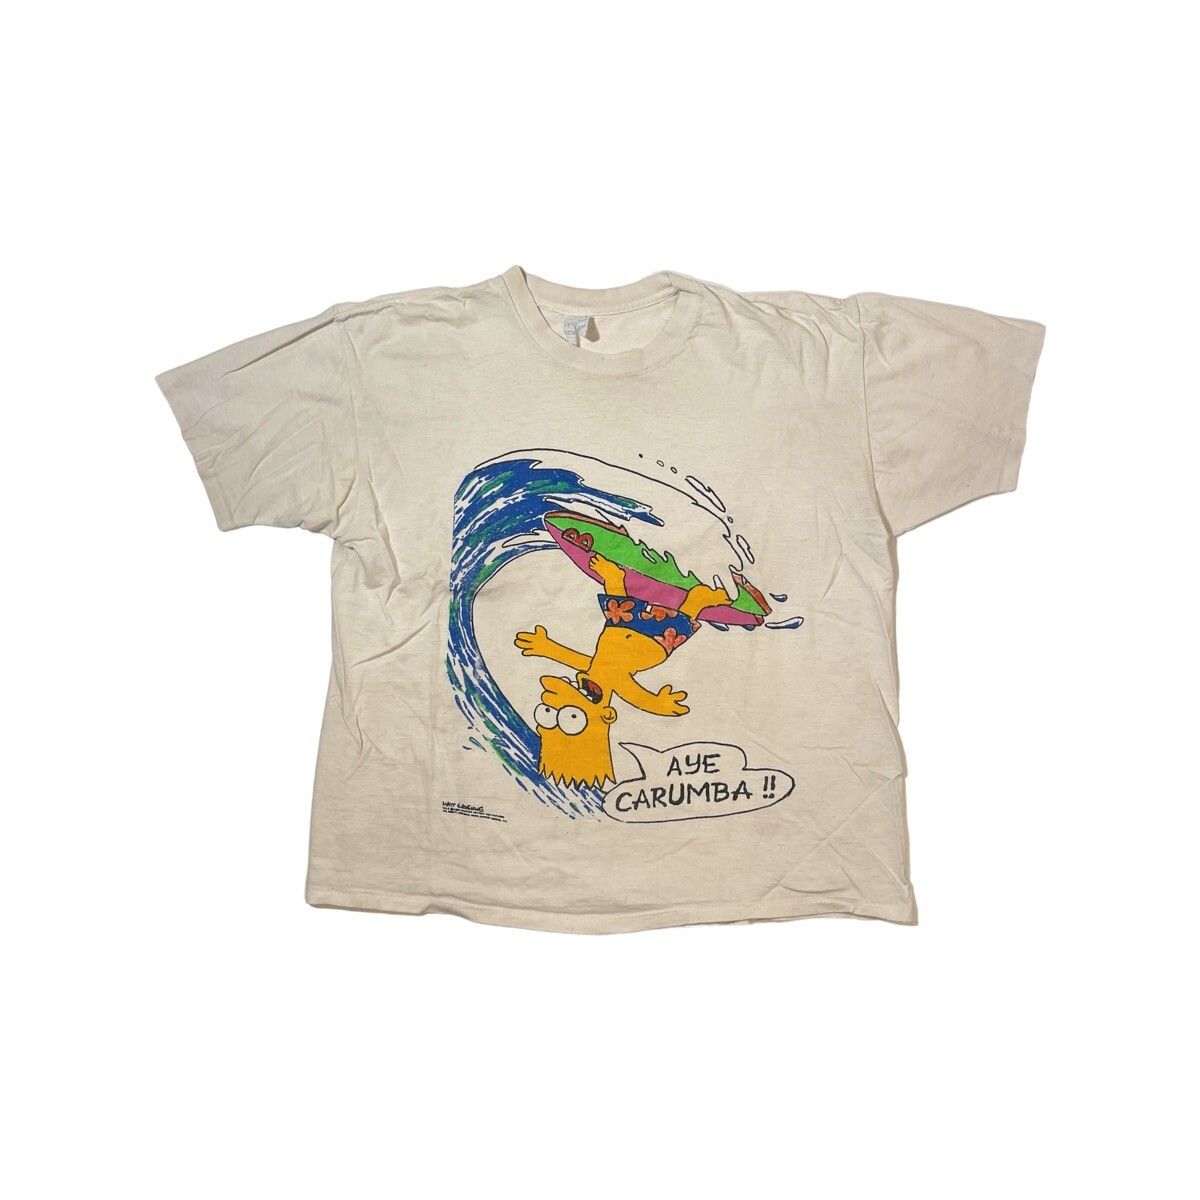 Vintage 90s The Simpsons Bart Surfing Tee Size US L / EU 52-54 / 3 - 1 Preview